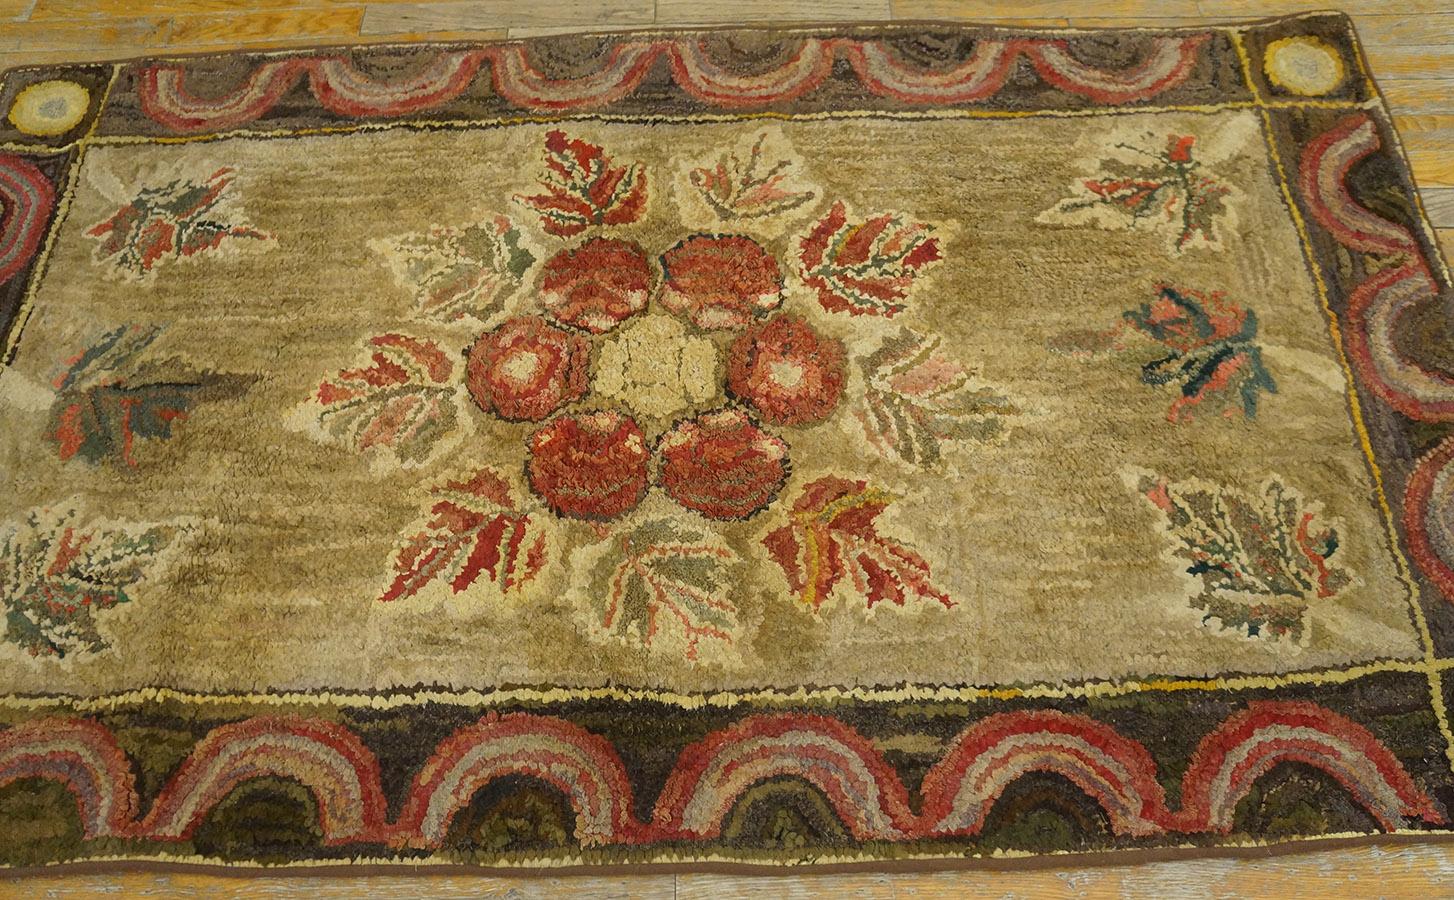  Early 20th Century American Hooked Rug 3' 2